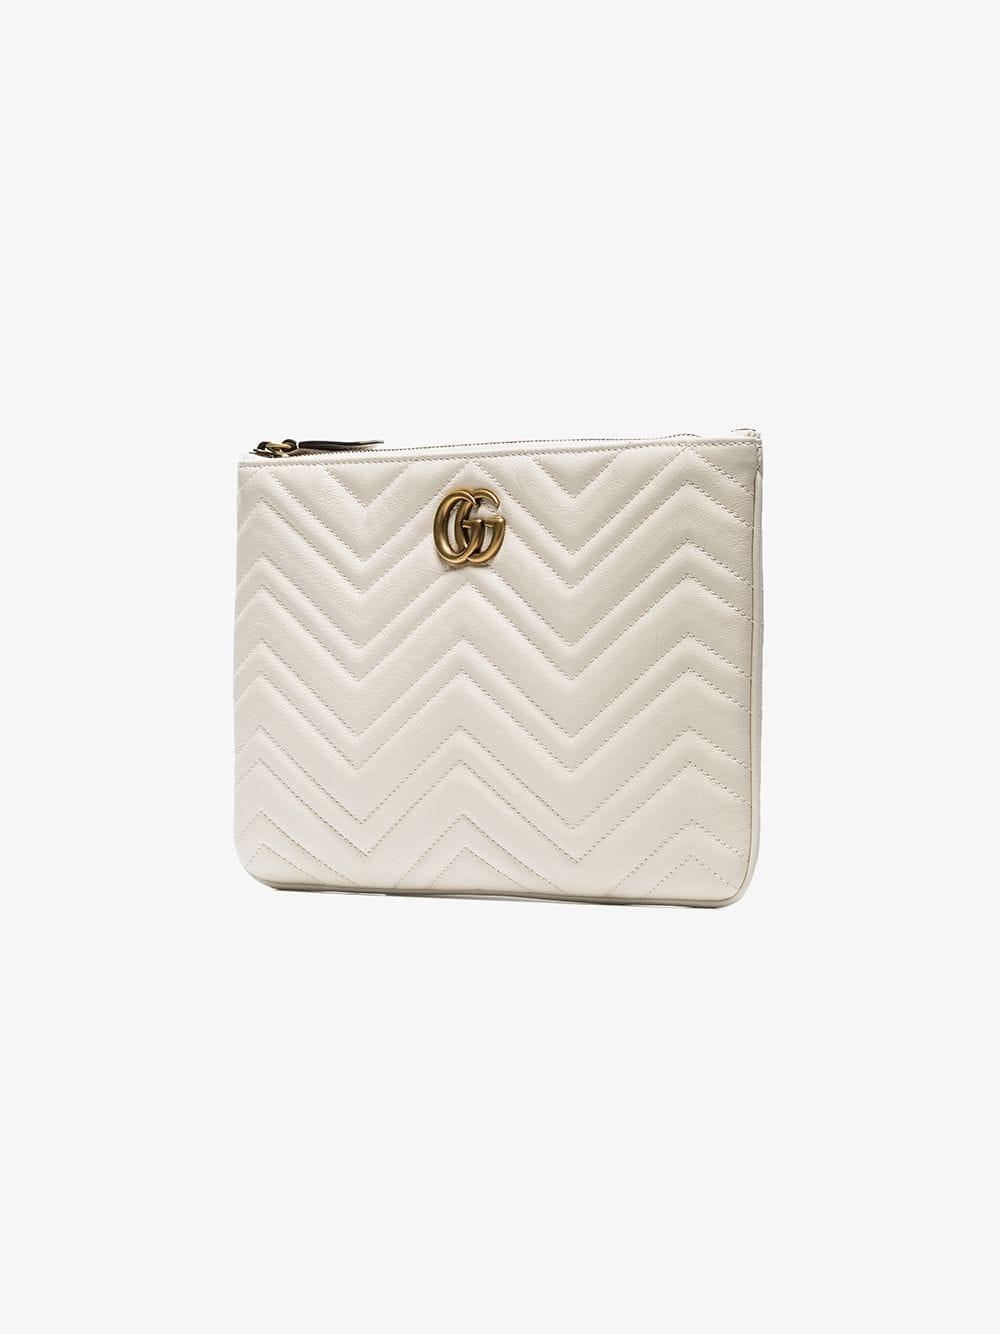 Gucci White Quilted-leather GG Clutch Bag in White - Lyst